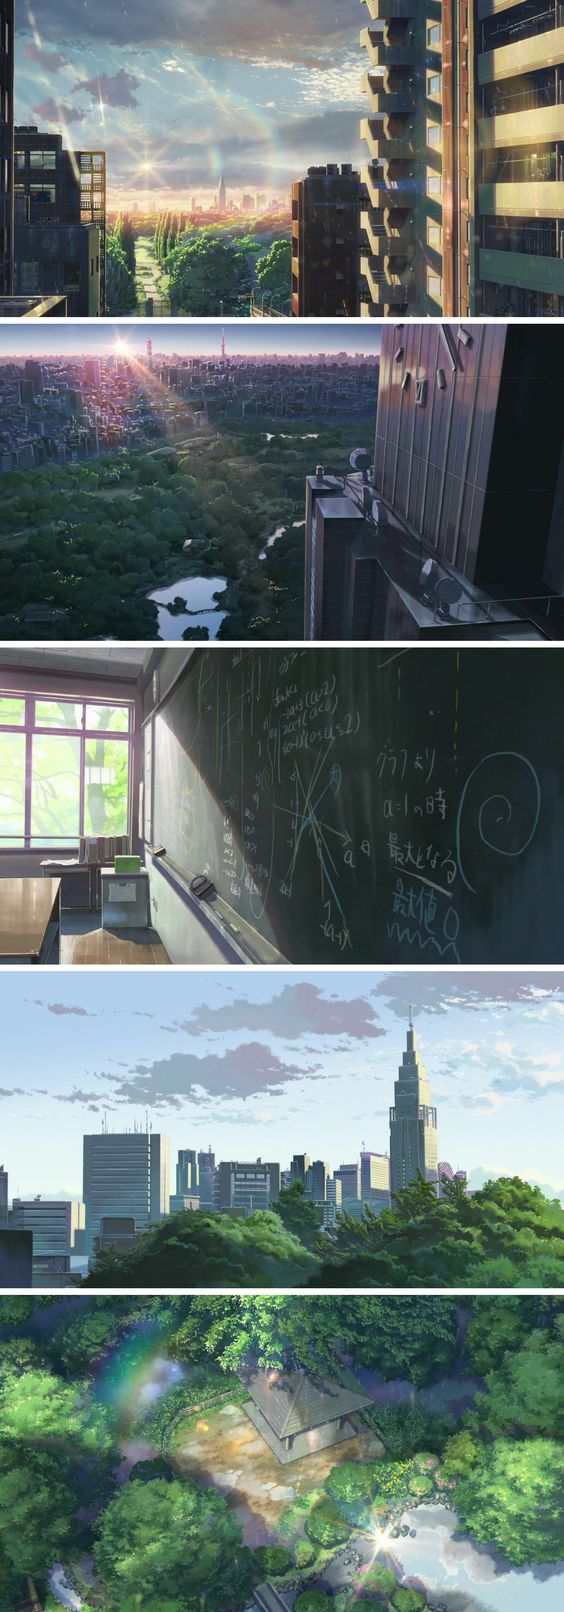 The Garden of Words (言の葉の庭 Kotonoha no Niwa) is a 2013 Japanese anime film produced by CoMix Wave Films and directed by Makoto Shinkai.